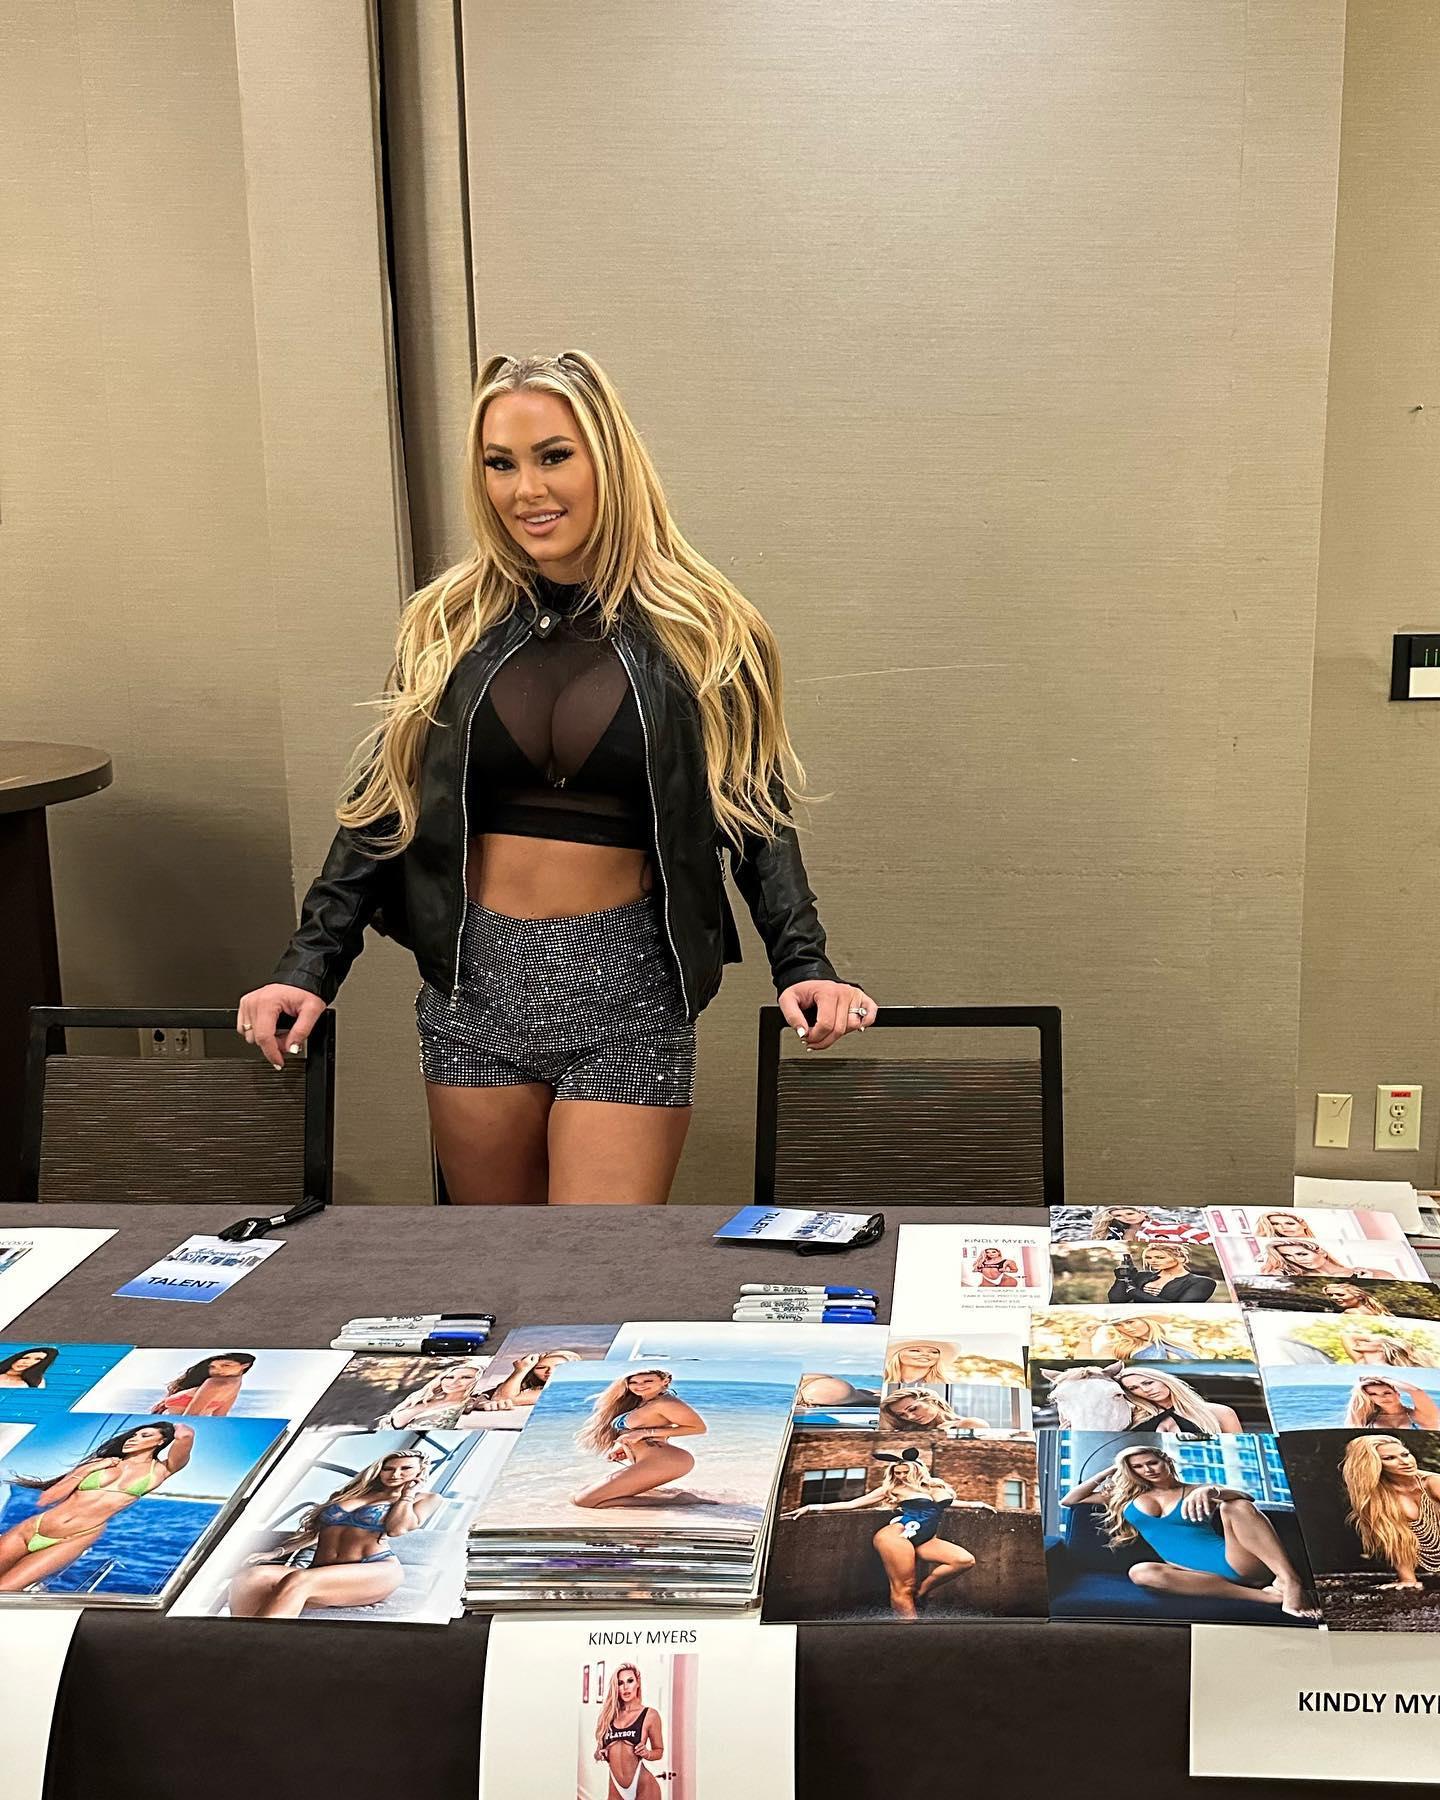 Kindly Myers poses in a see-through shirt 